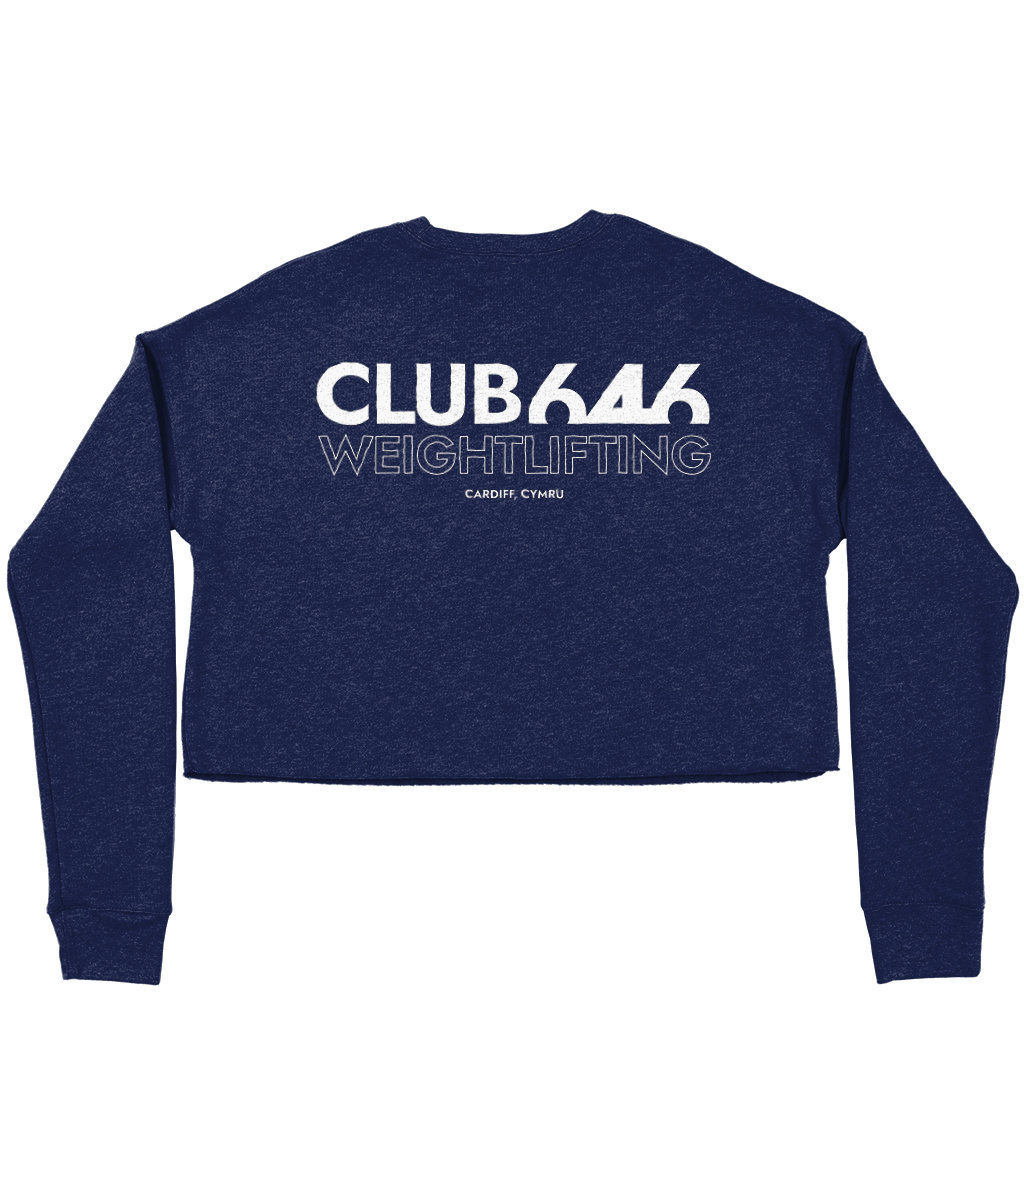 Club 646 collage cropped jumper